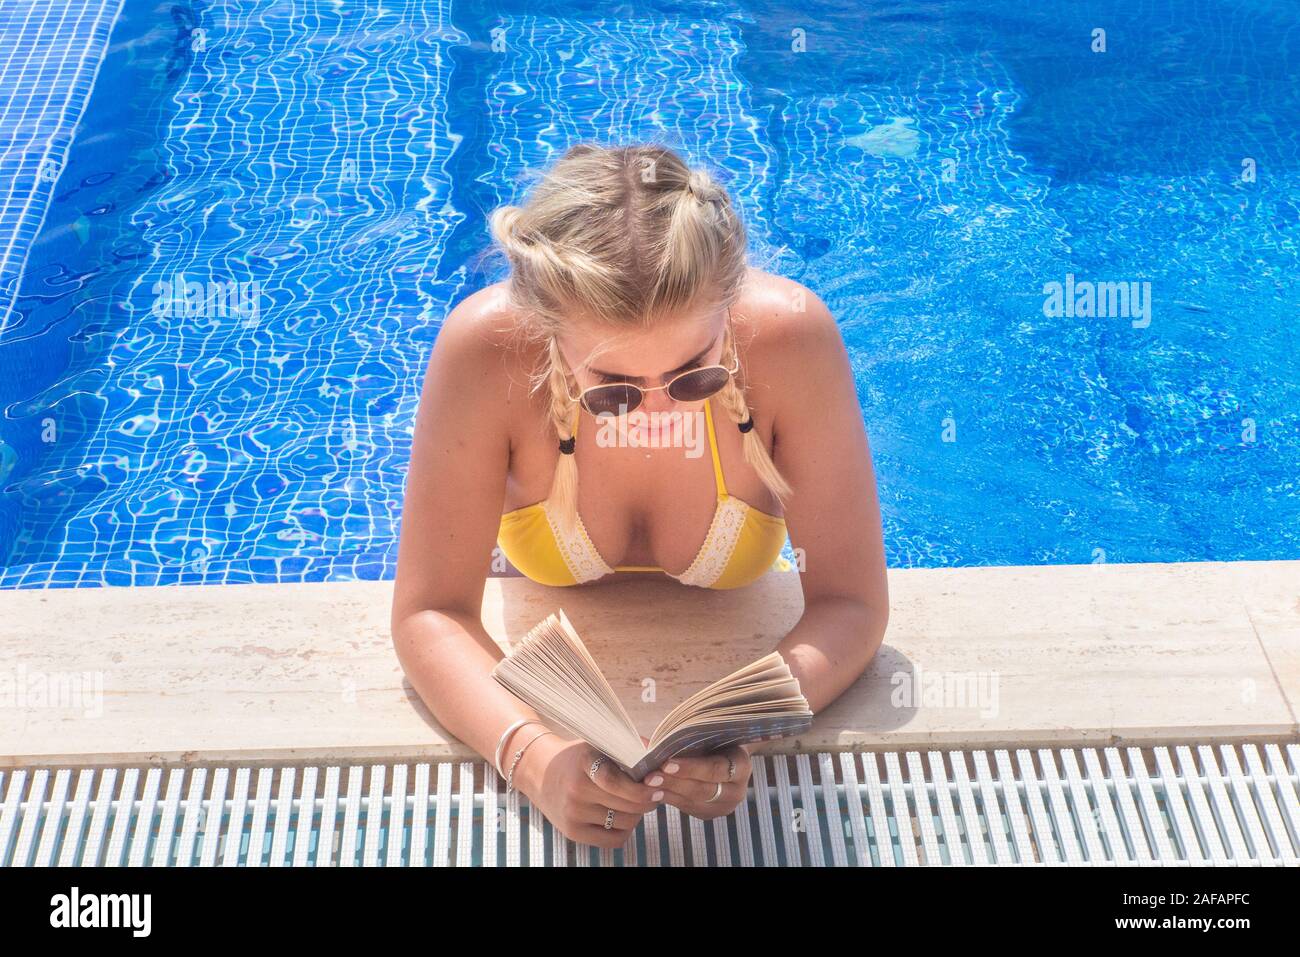 Relaxing by a pool on holiday reading a book Stock Photo